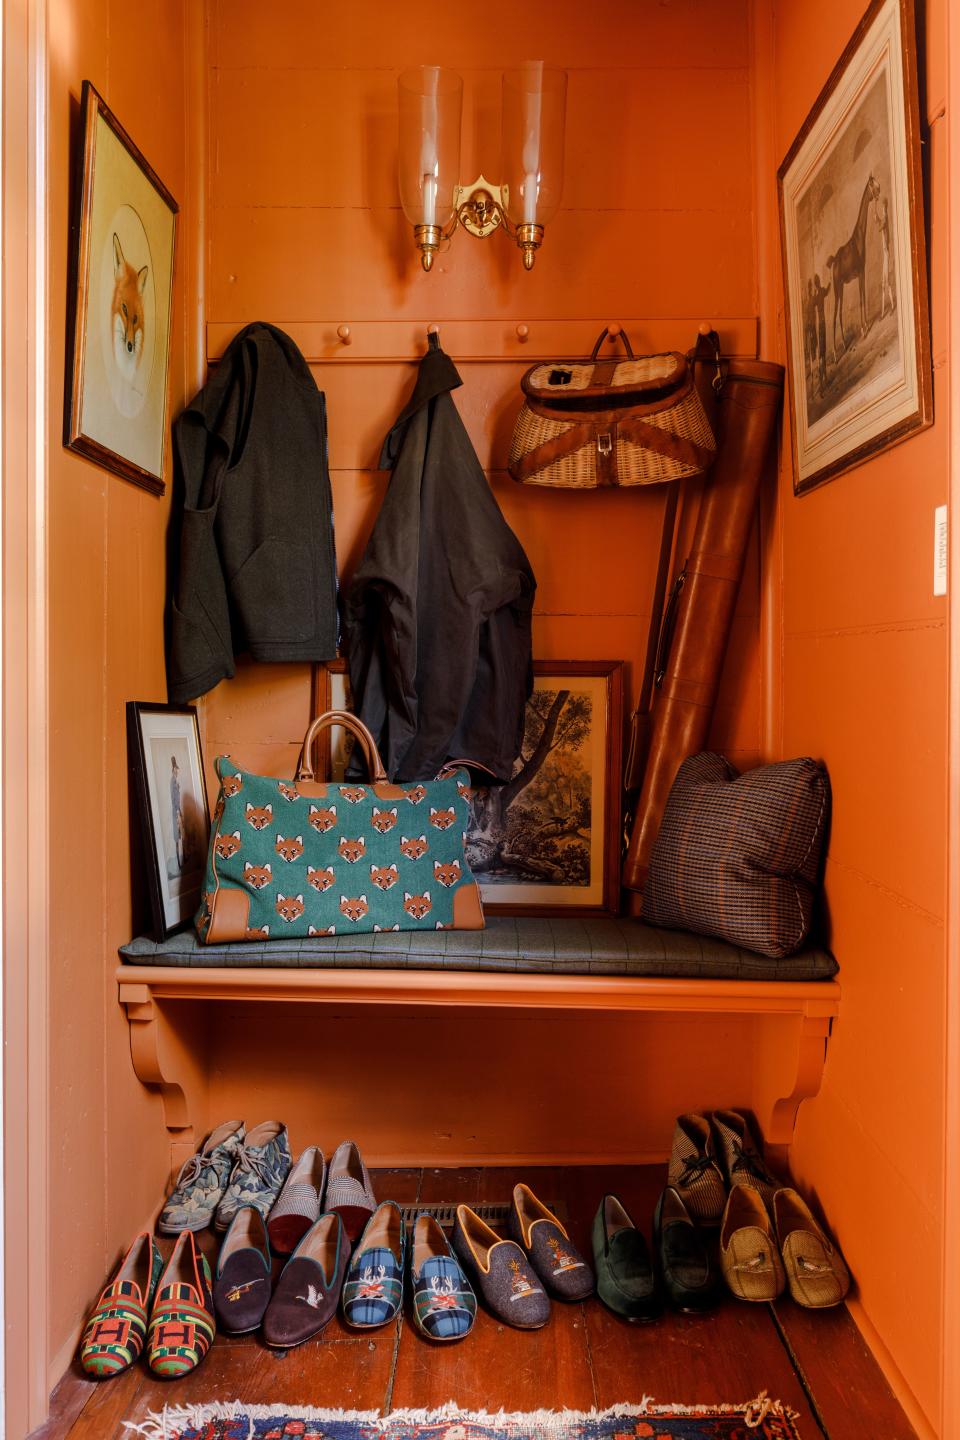 The mud room is one of Steinhart’s favorite spaces and is full of Stubbs & Wootton slippers, of course.